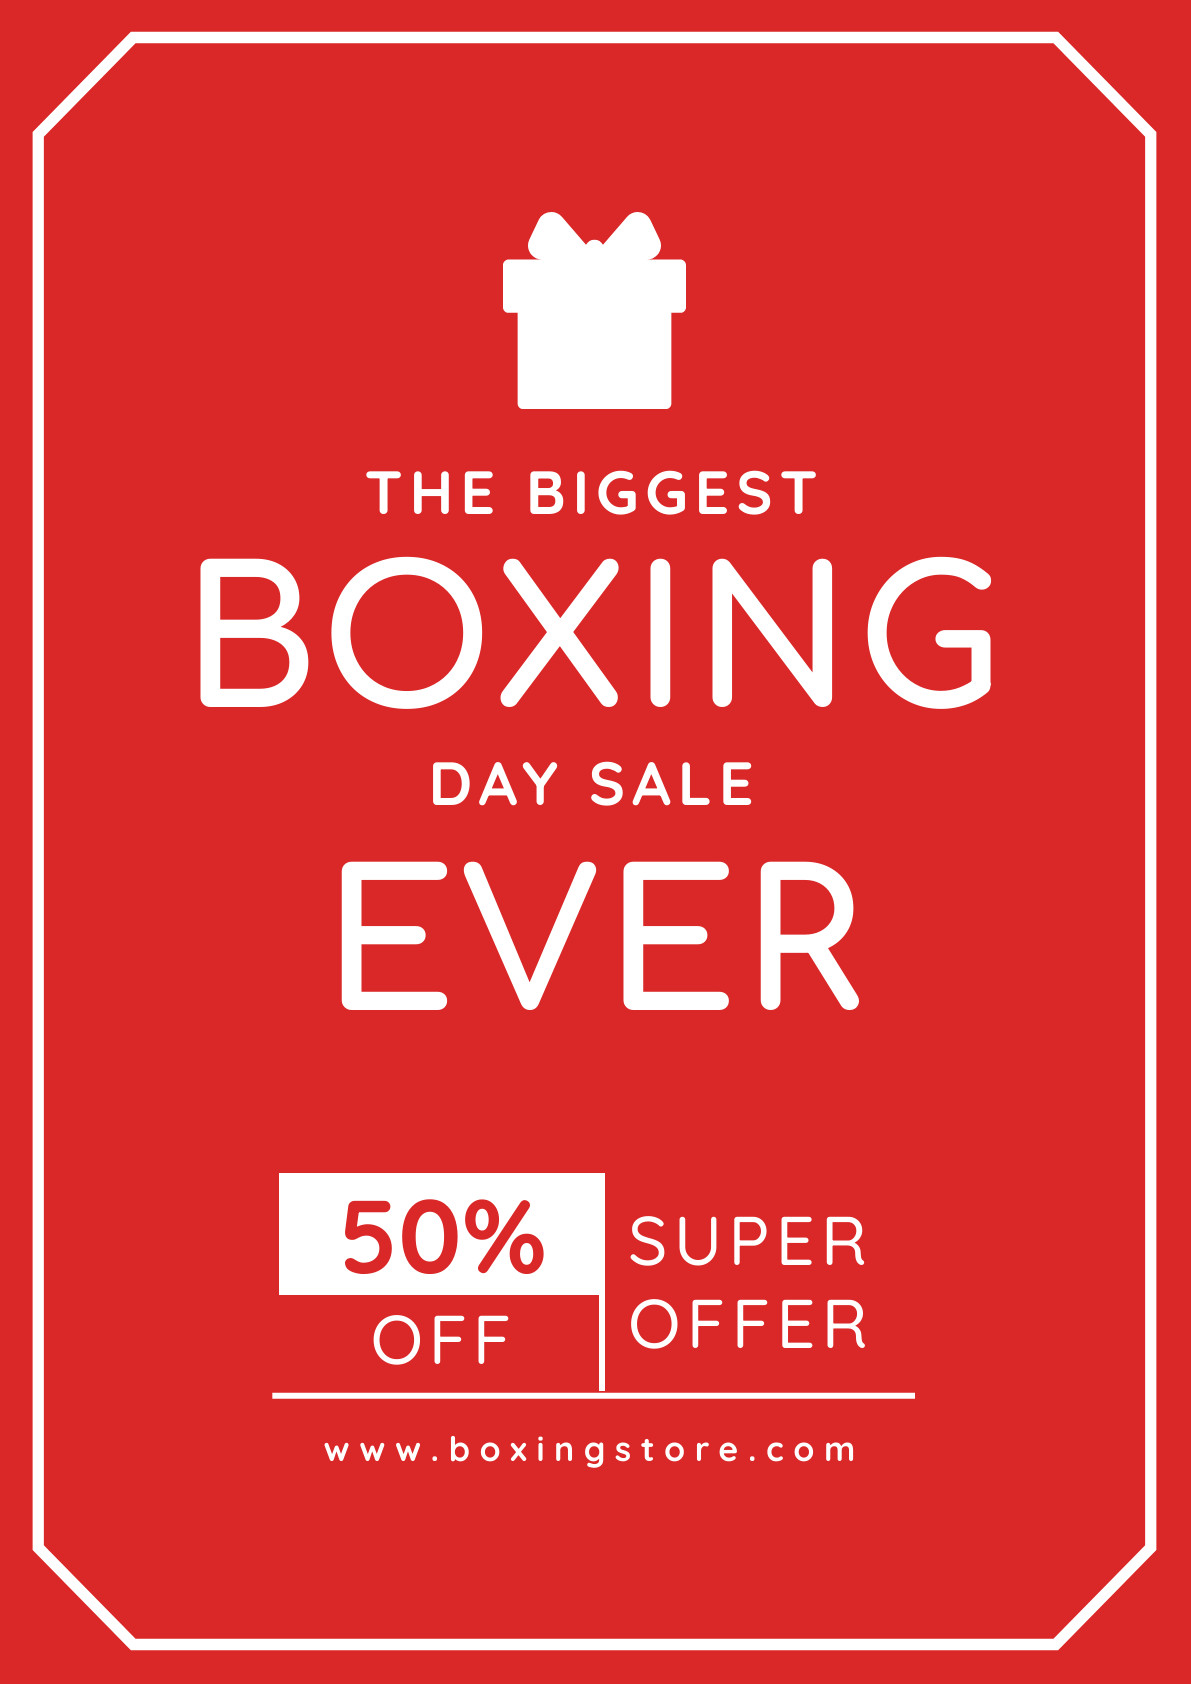 The Biggest Boxing Day Sale Ever Poster